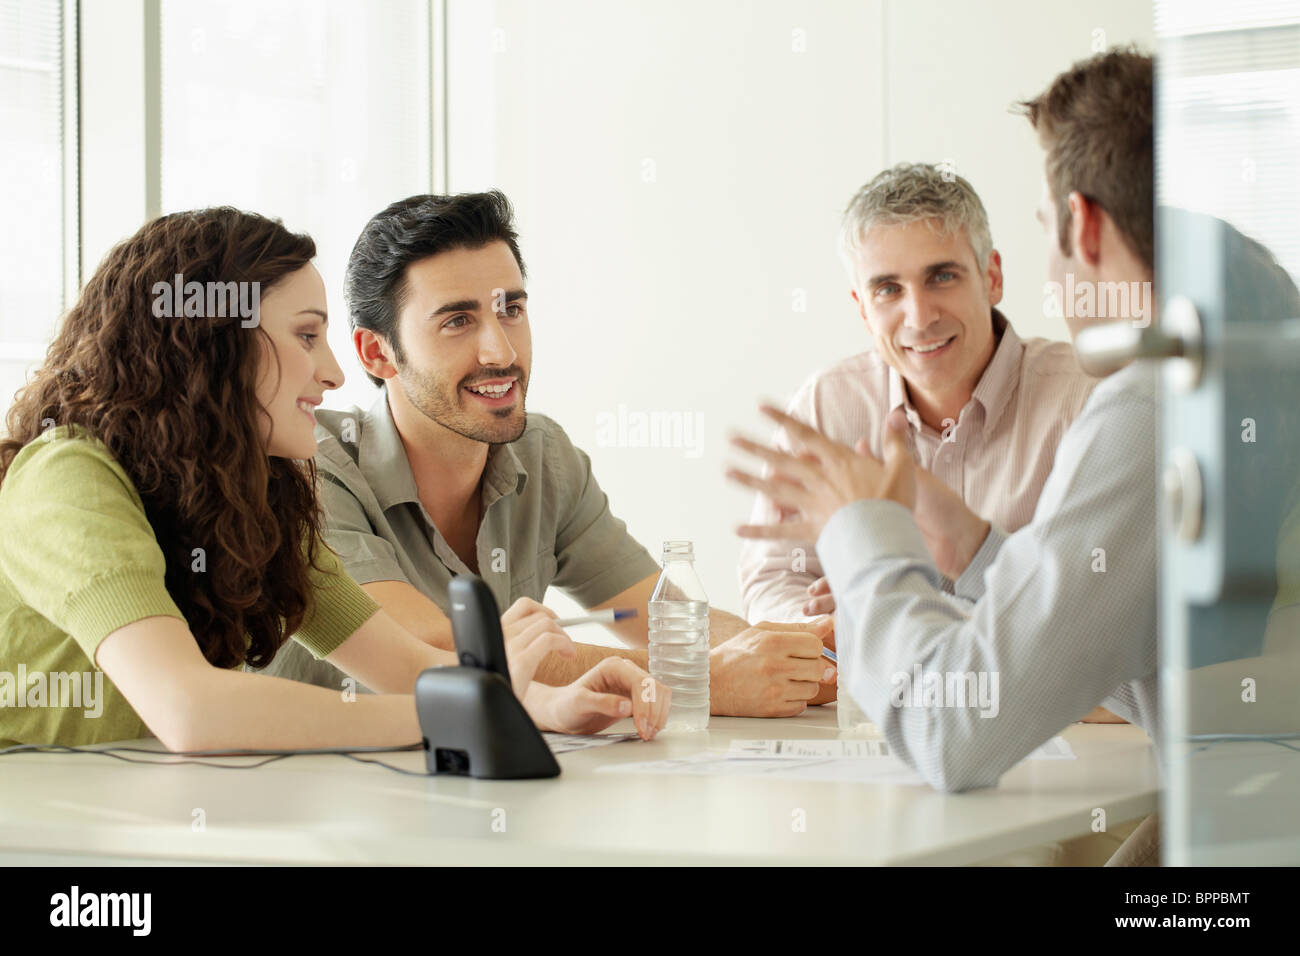 four people in discussion Stock Photo